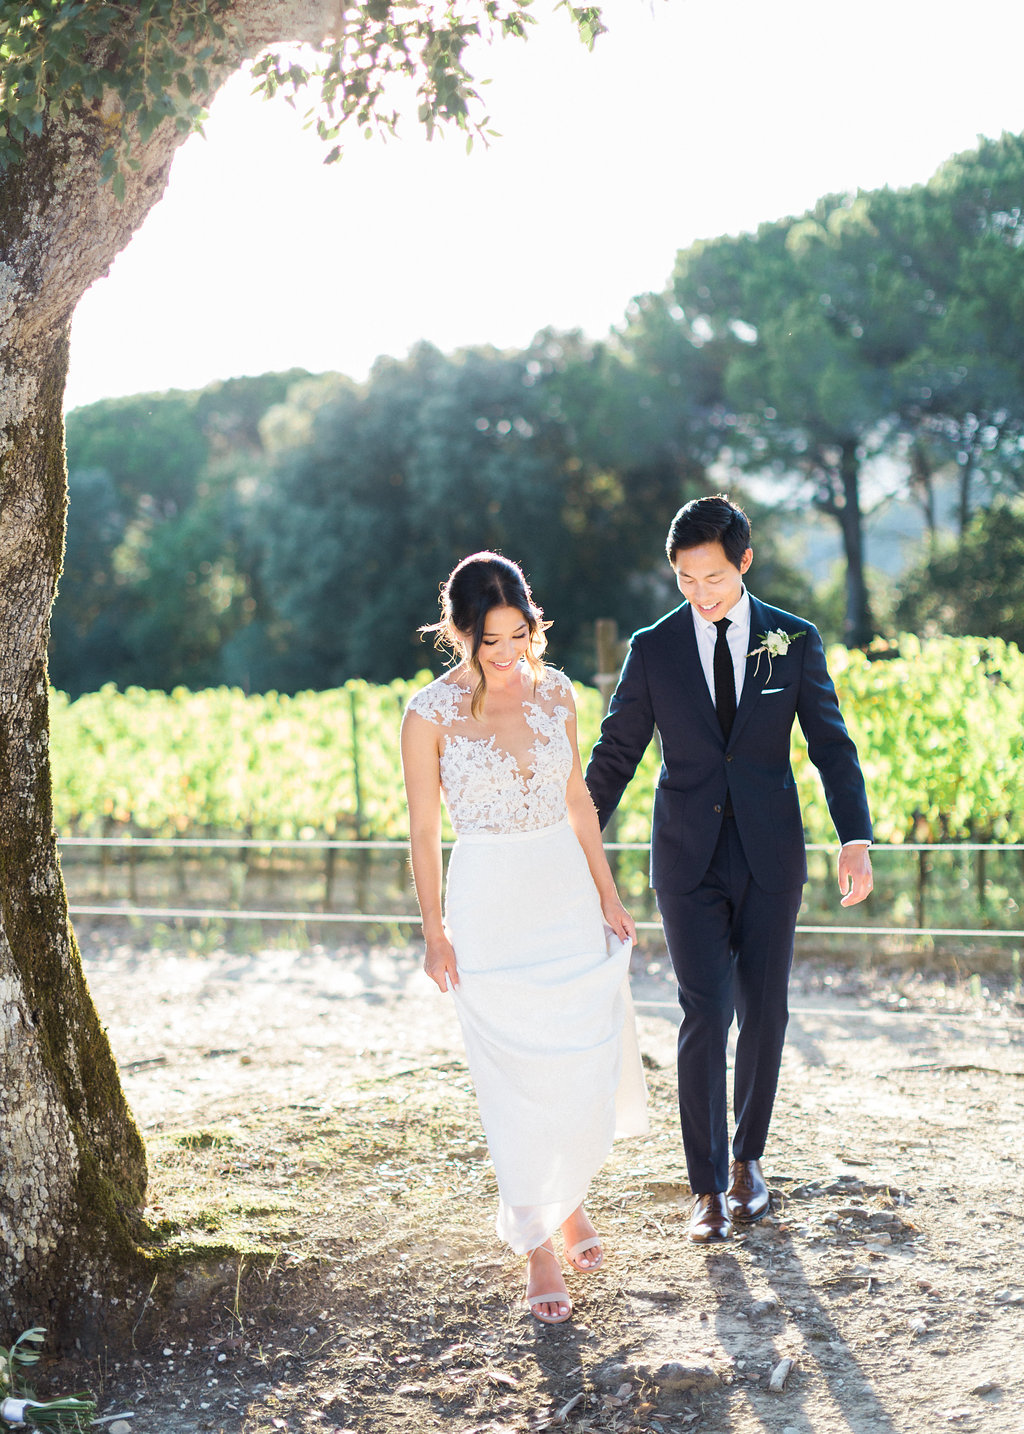 Intimate and Romantic Tuscany Destination Wedding by Kir 